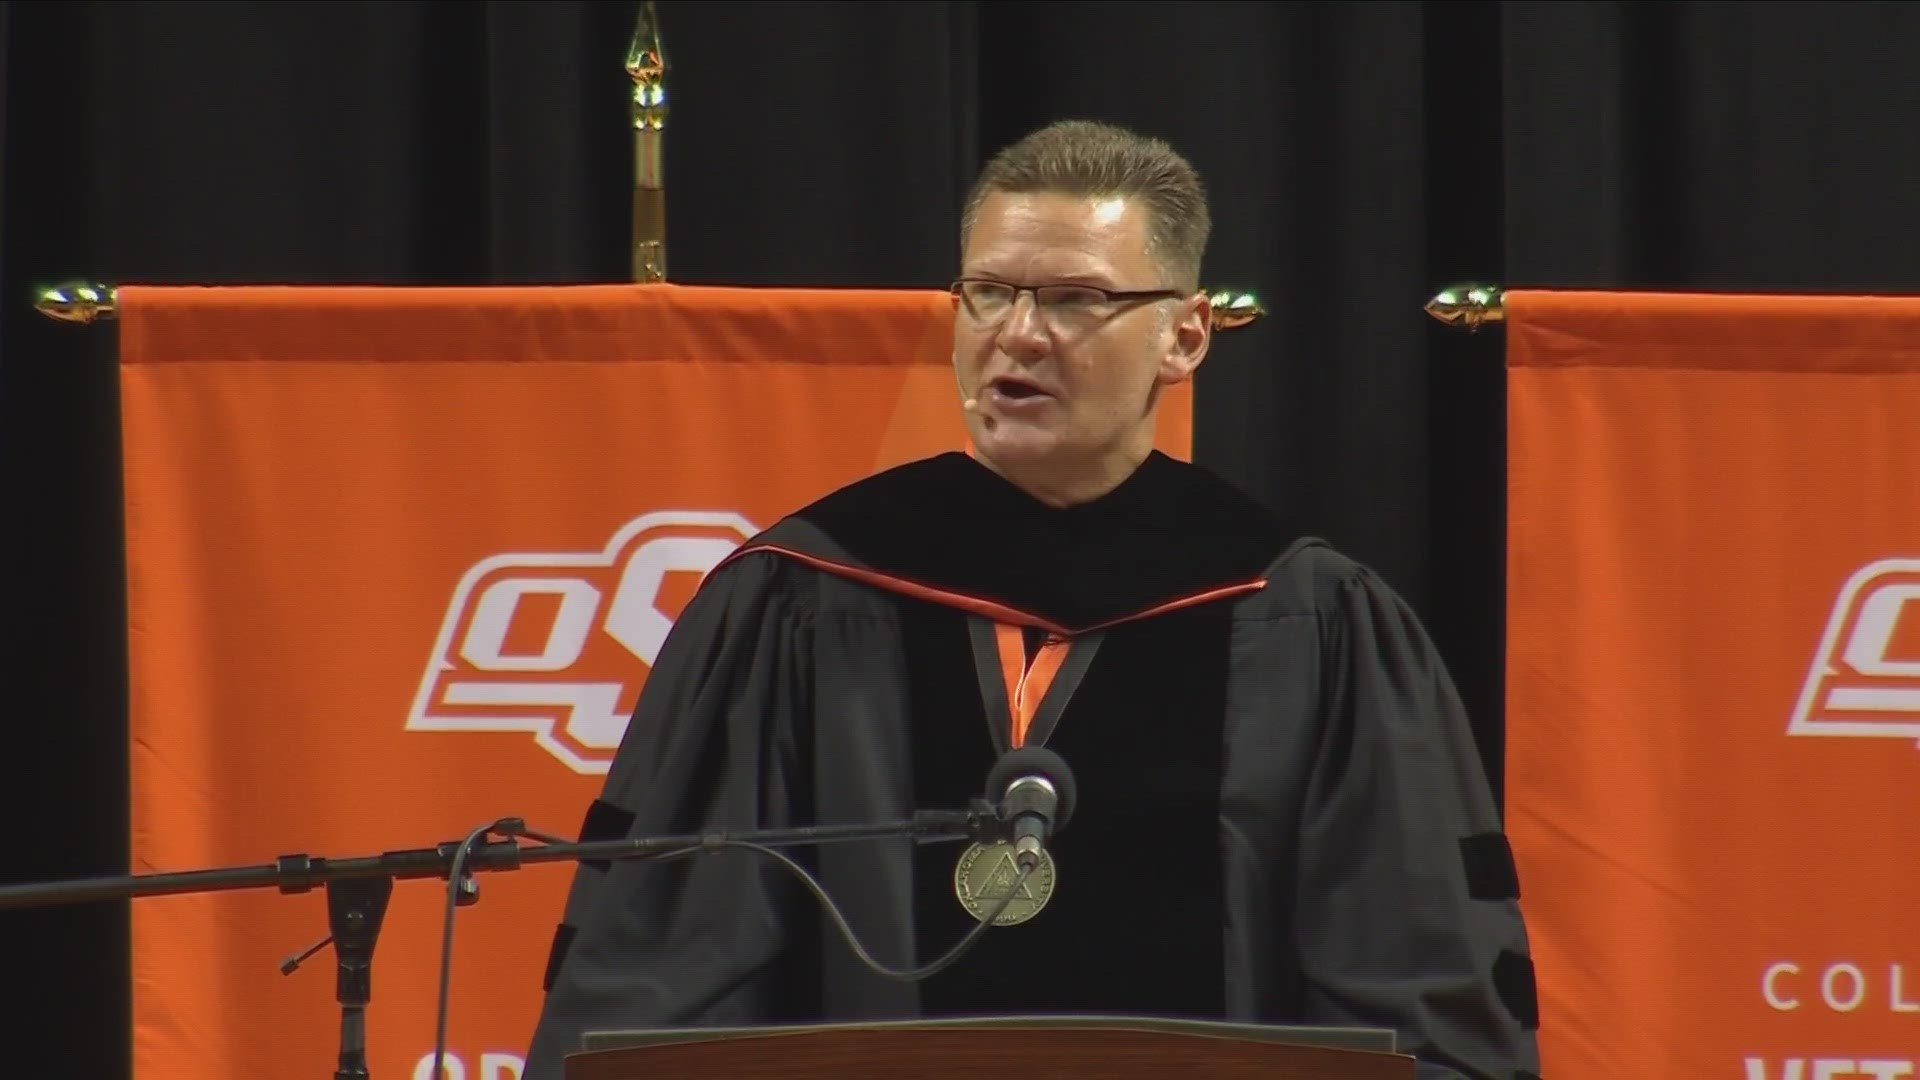 Bills assistant athletic trainer Denny Kellington returned to his alma mater, Oklahoma State University, to speak during the spring commencement ceremonies.